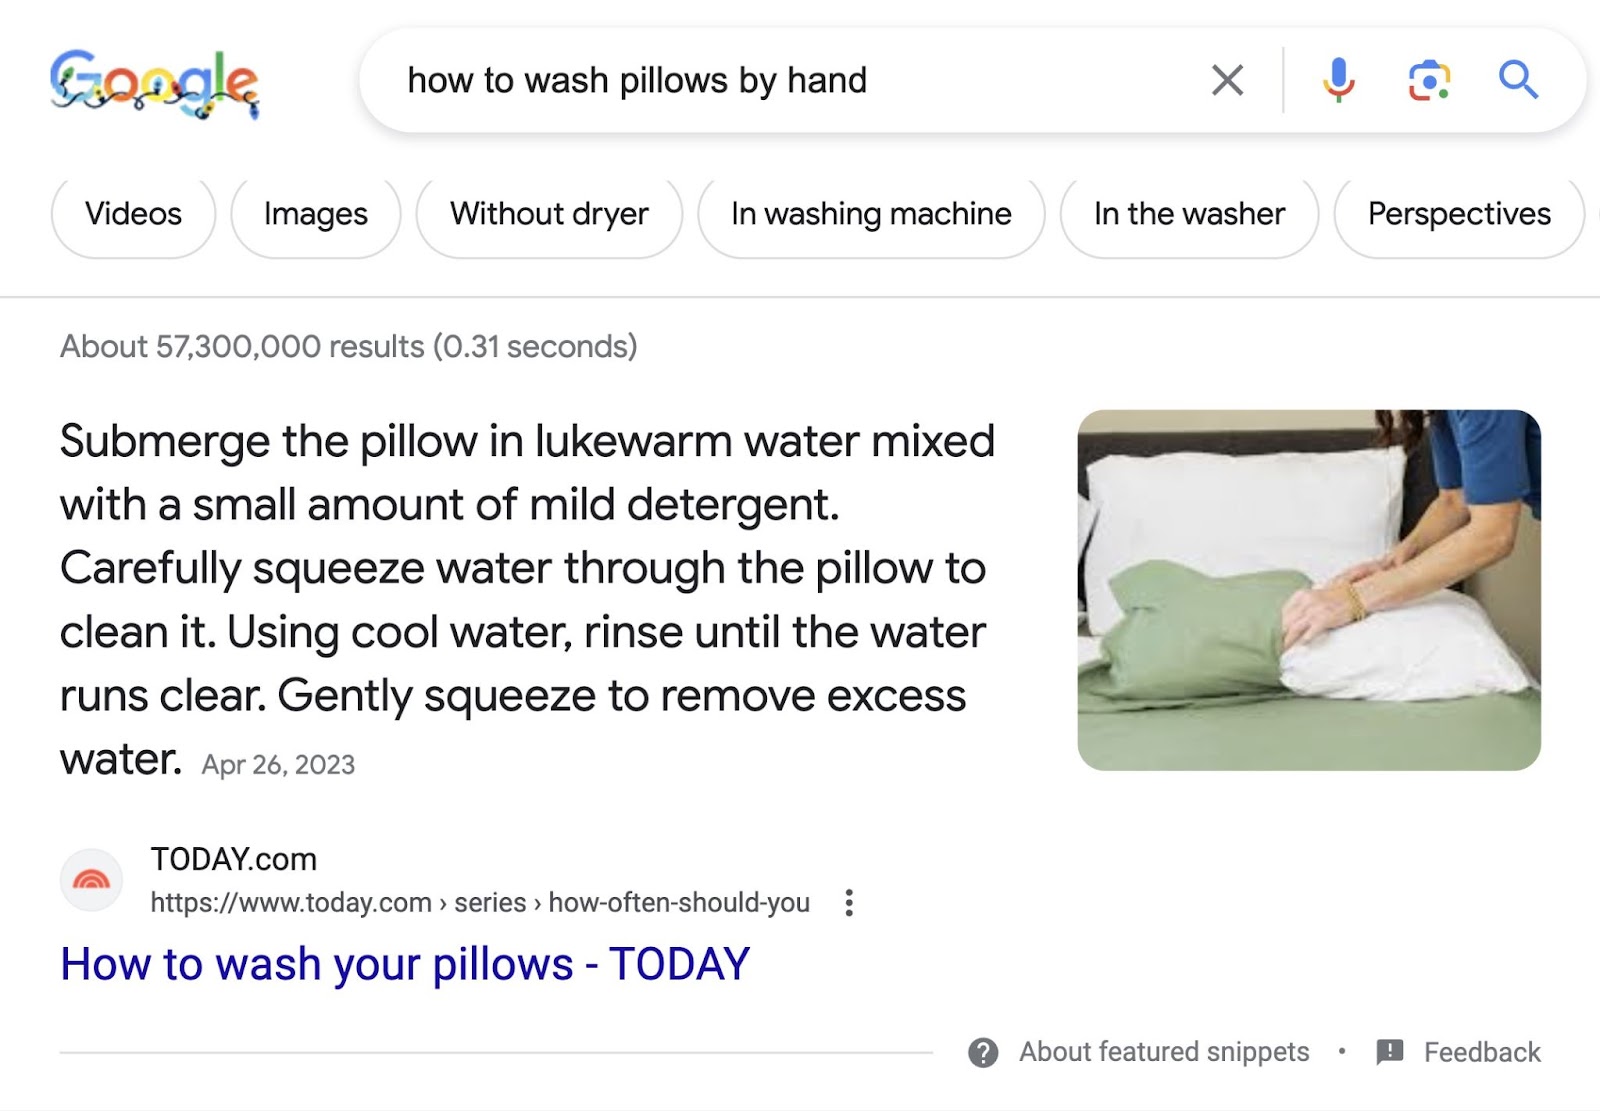 A featured snippet for "how to wash pillows by hand" query